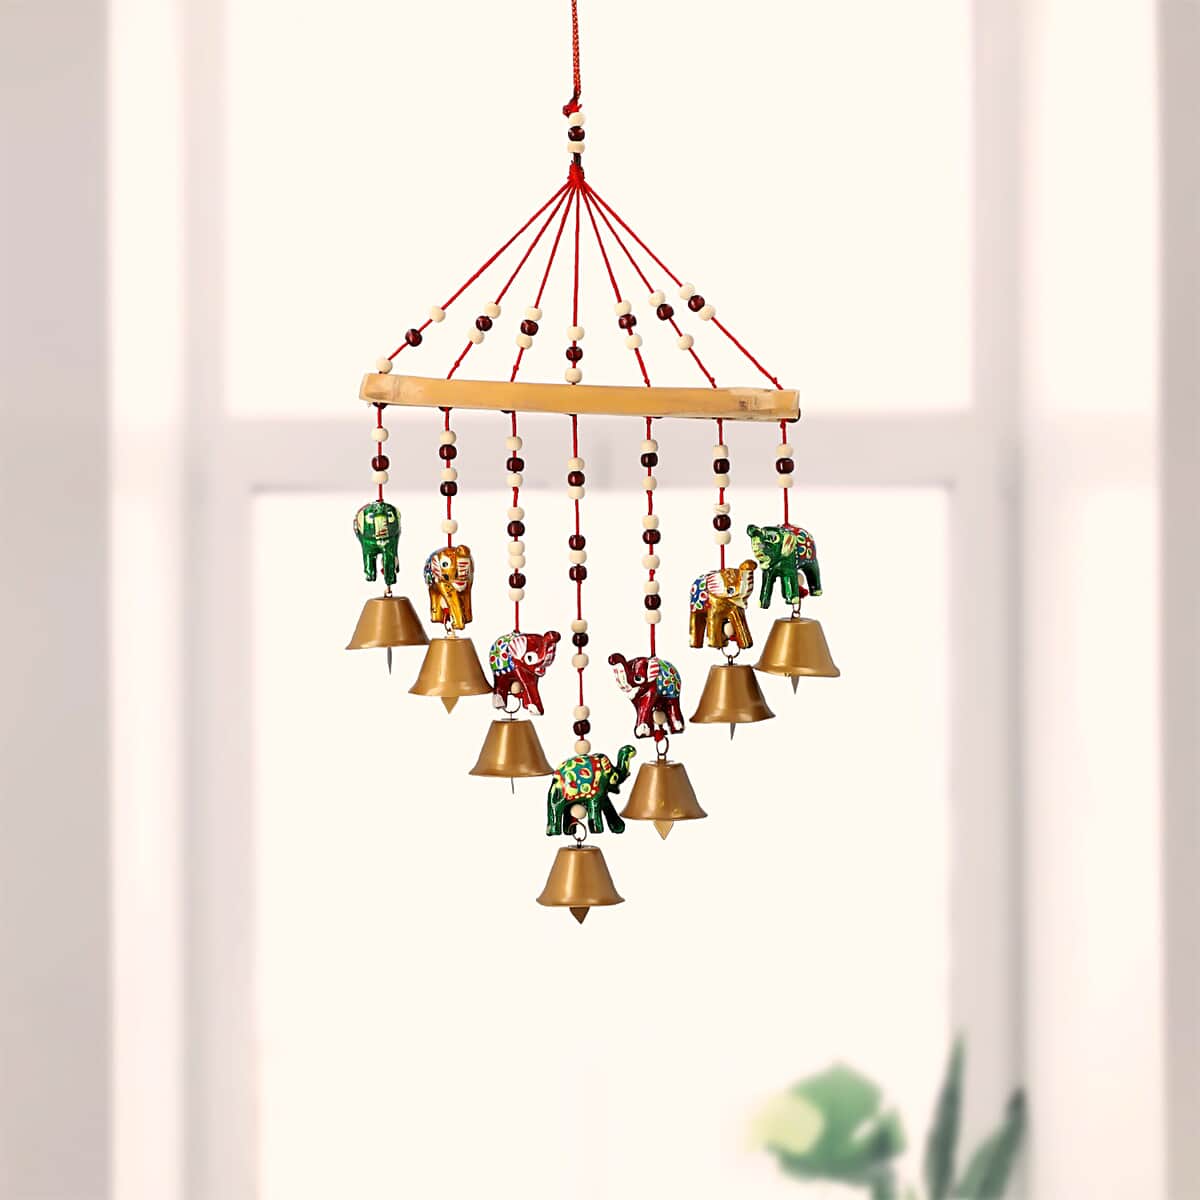 Set of 2 Home Room Decor Handcrafted Wooden Elephant Outdoor Wind Chime Big Iron Bell Noise Maker Multi Color image number 1